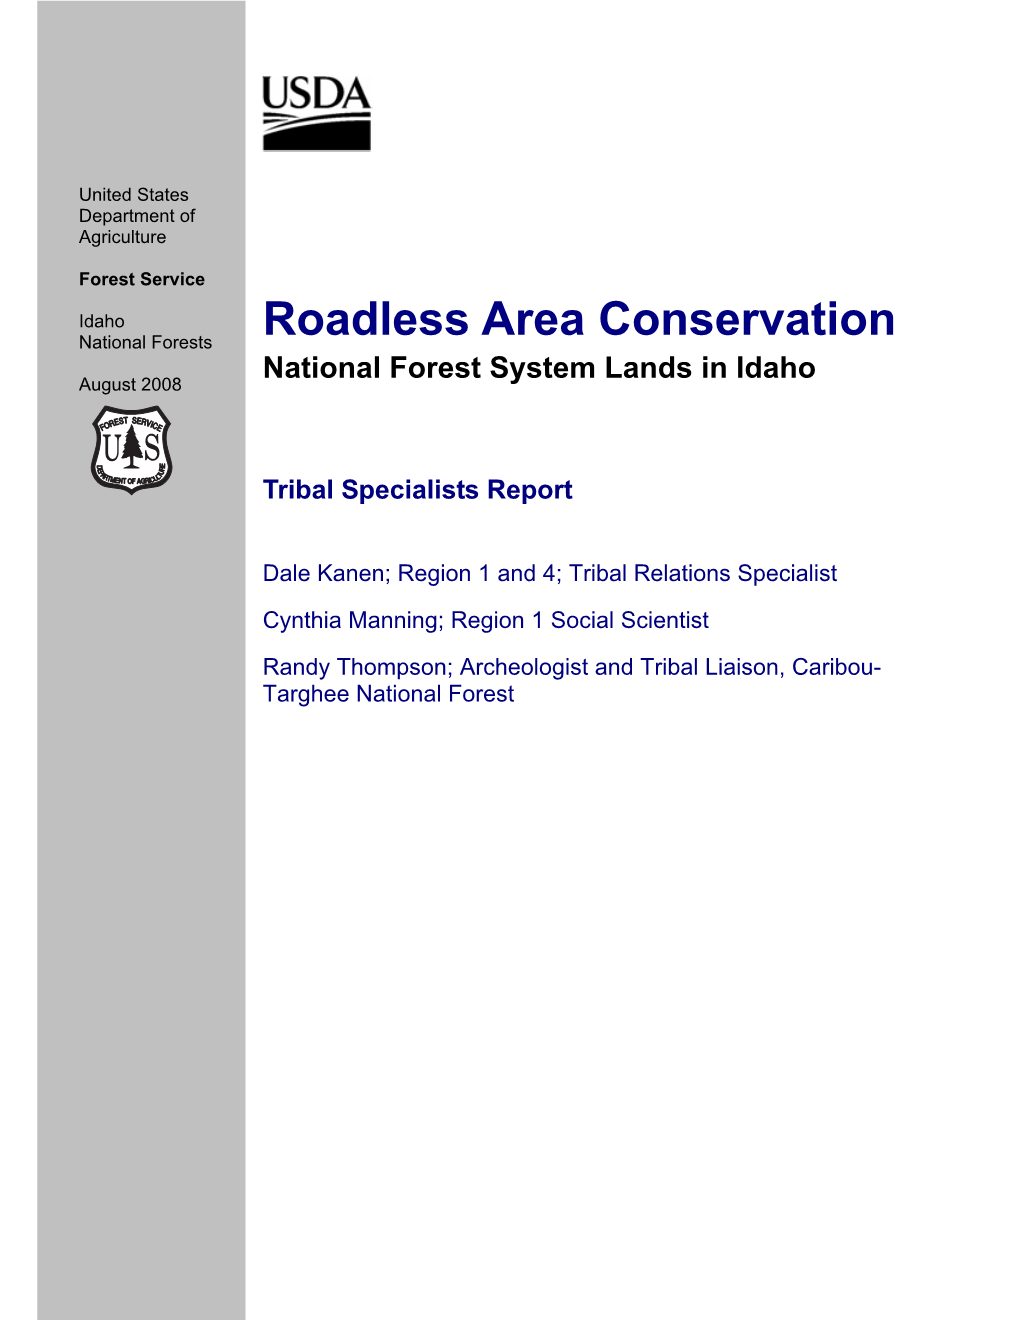 Roadless Area Conservation; National Forest Systems Land in Idaho BEIS